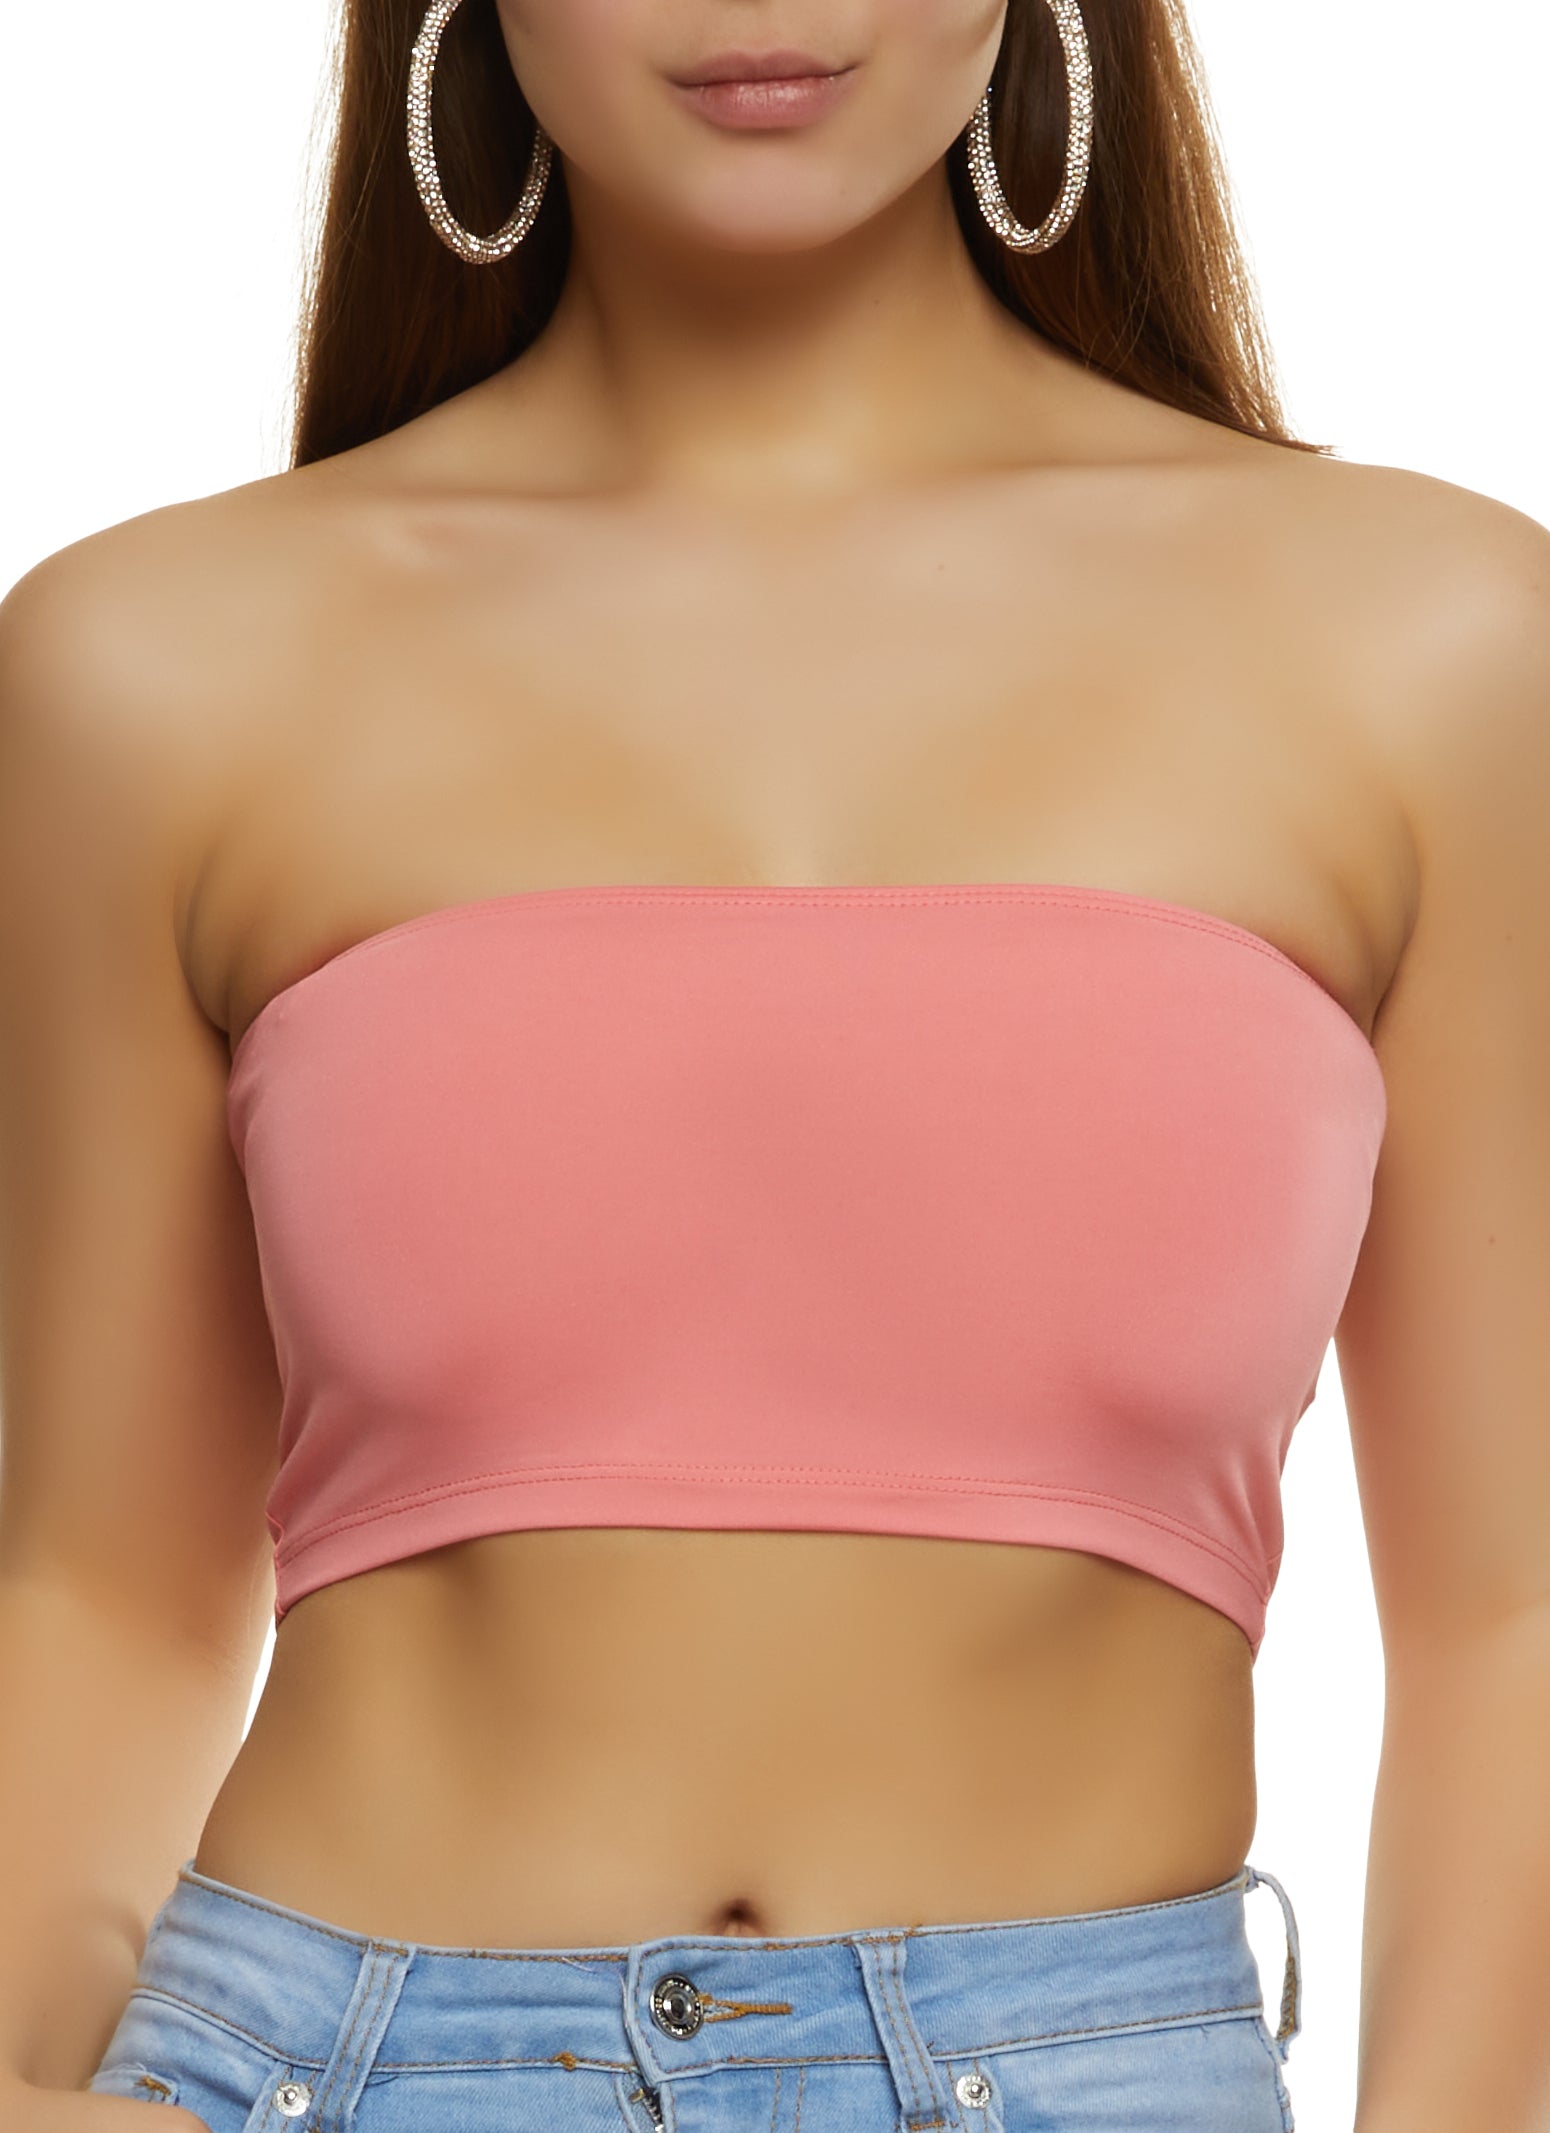 Tube Tops and Bandeau Tops, Everyday Low Prices